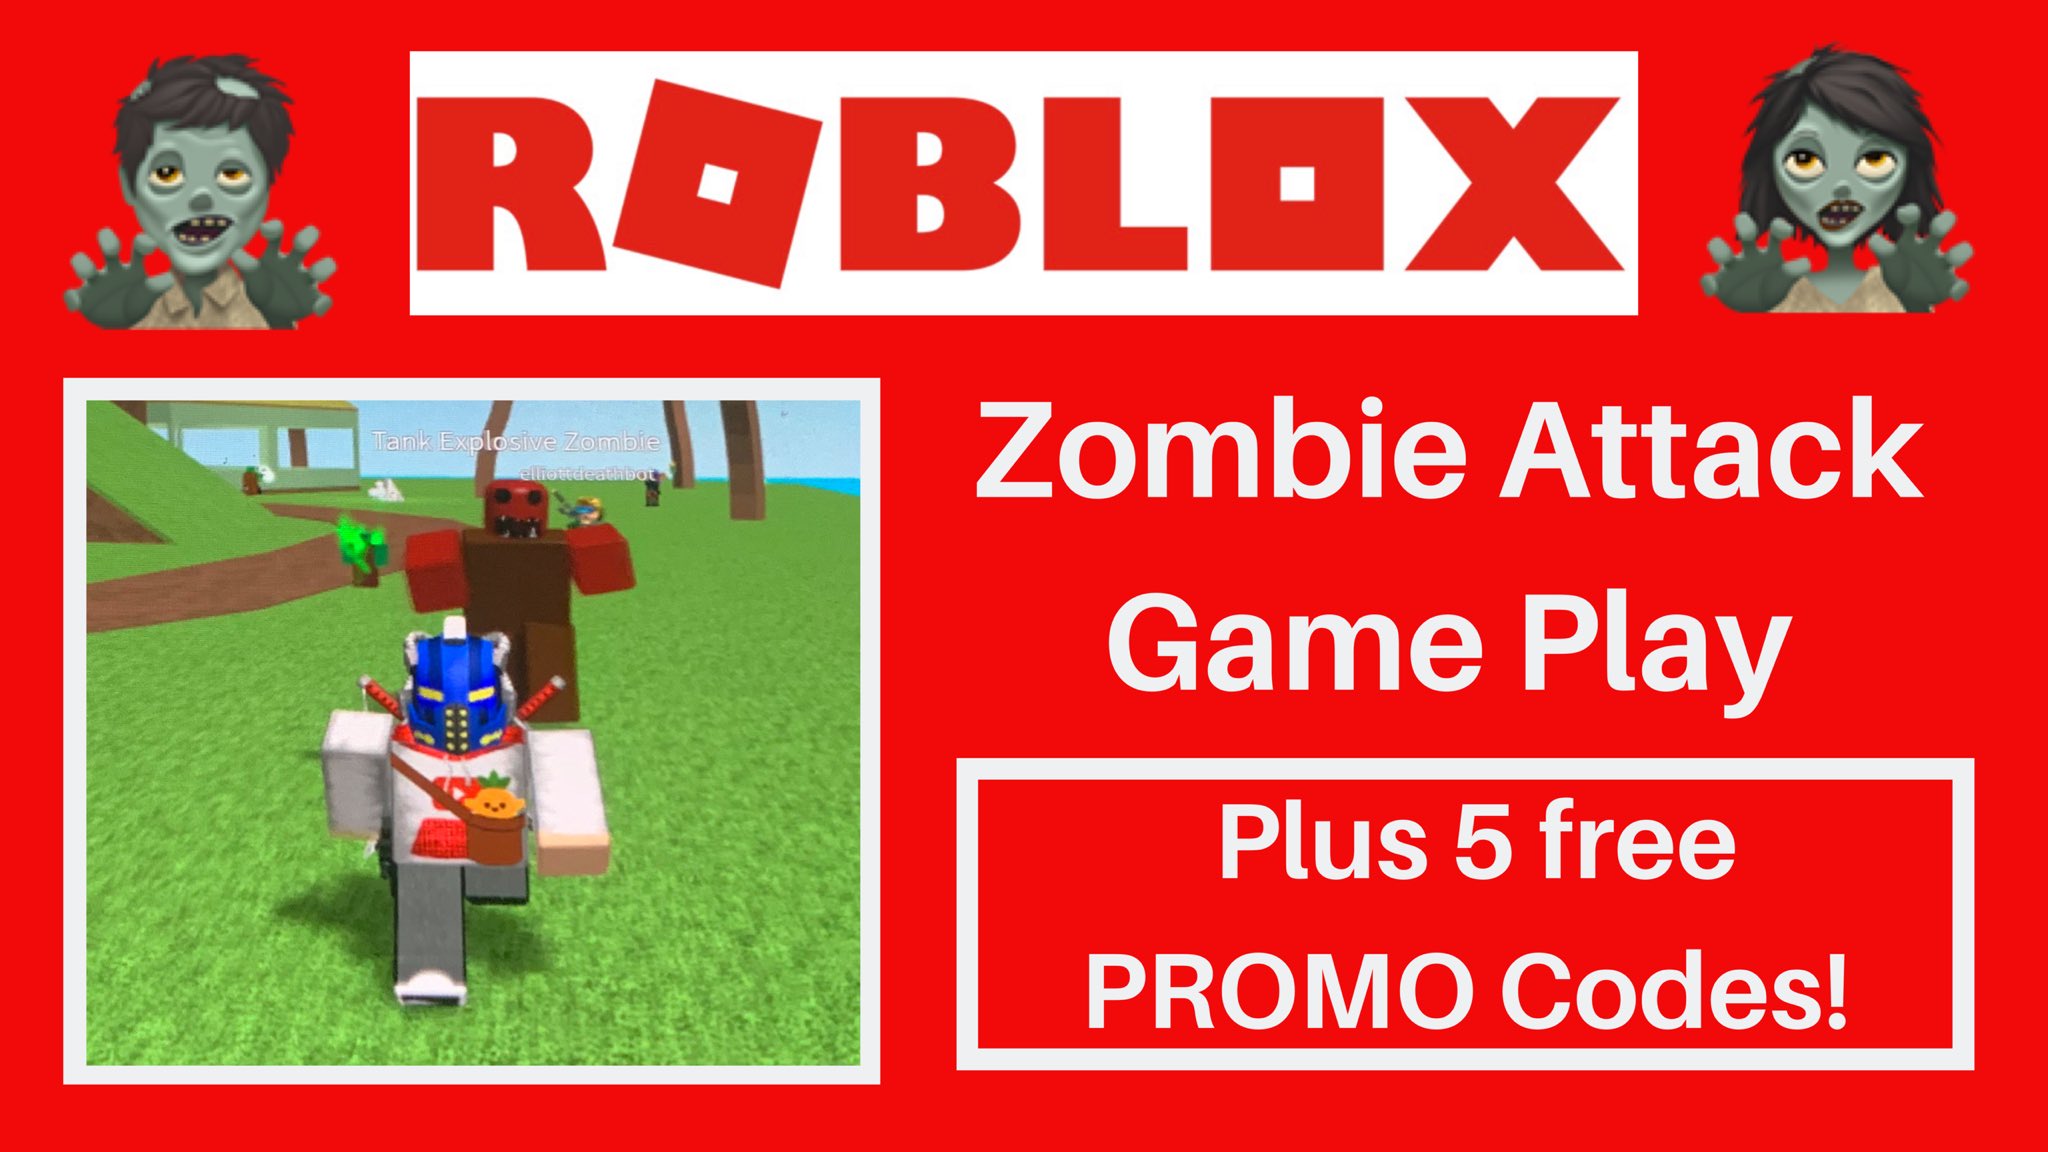 Deathbotbrothers On Twitter Roblox Promo Codes And Zombie Attack